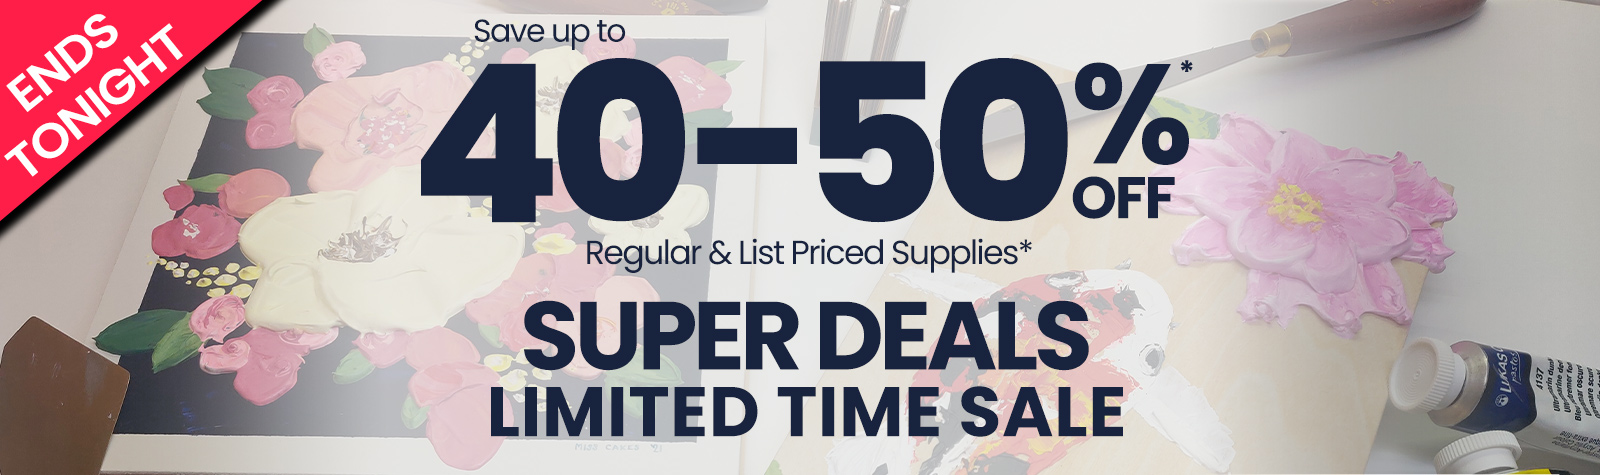 Save up to 50% Off Regular & List - Limited Time Sale